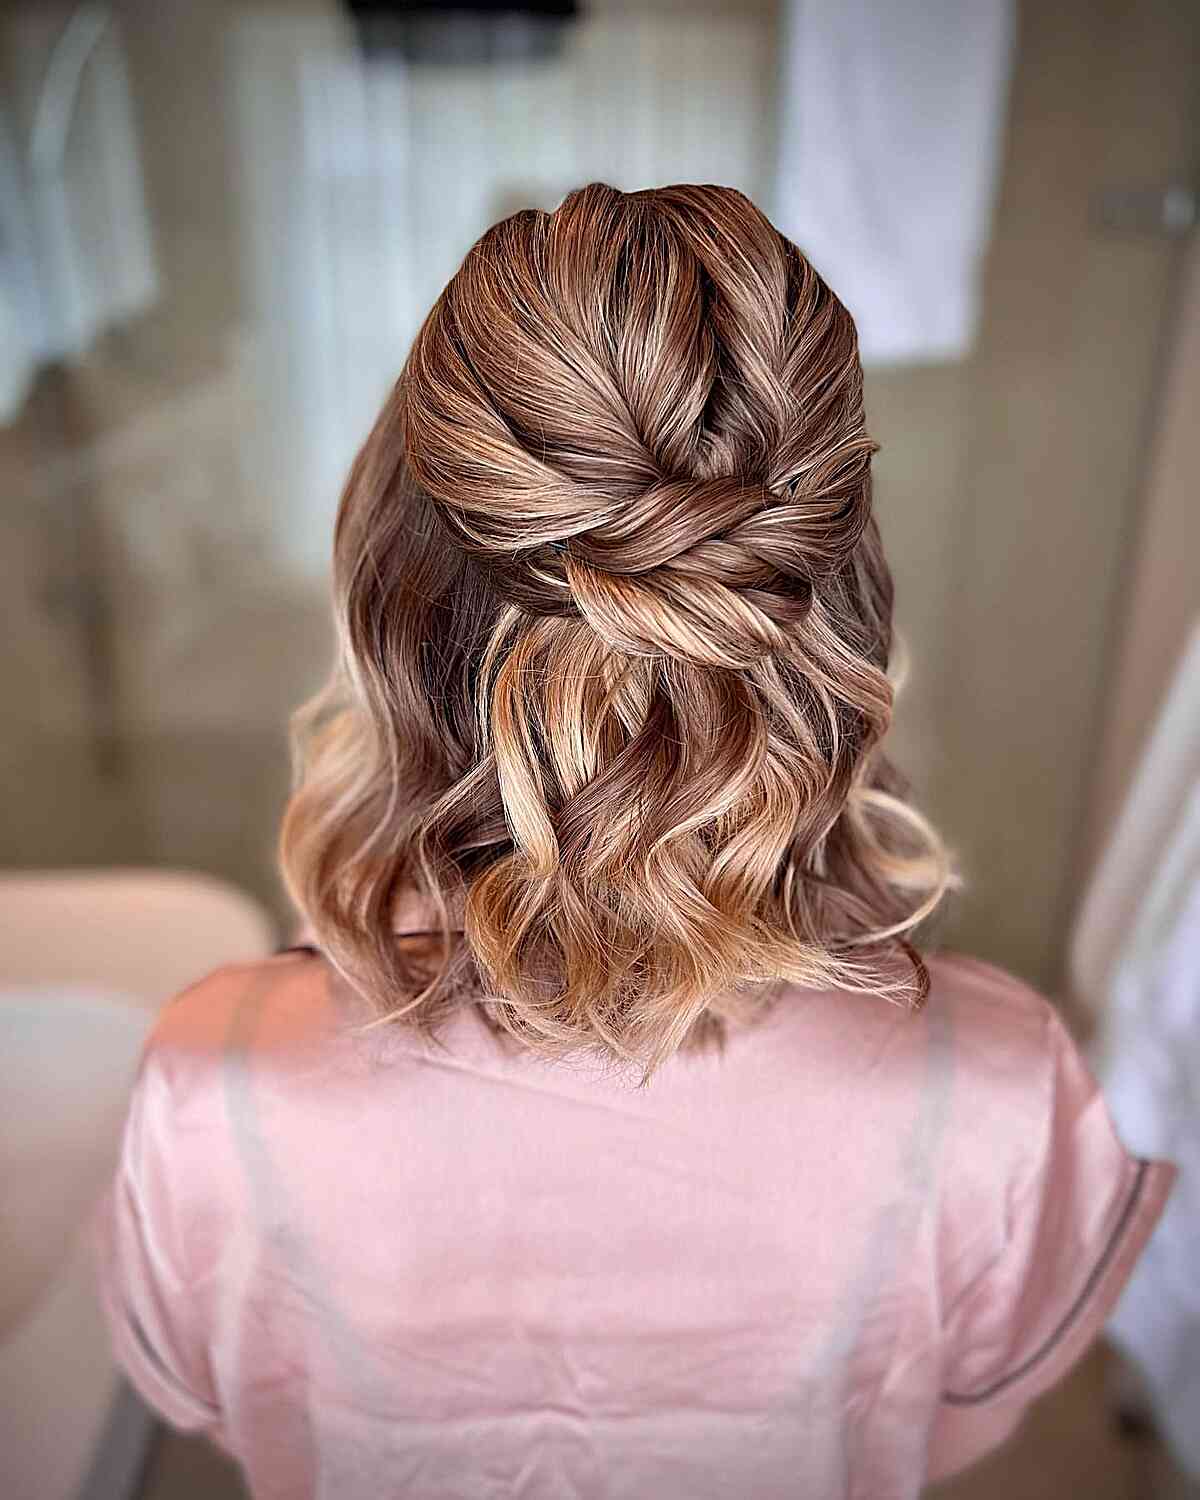 Romantic Hairstyles for Short Hair For Valentine's Day! | All Things Hair PH